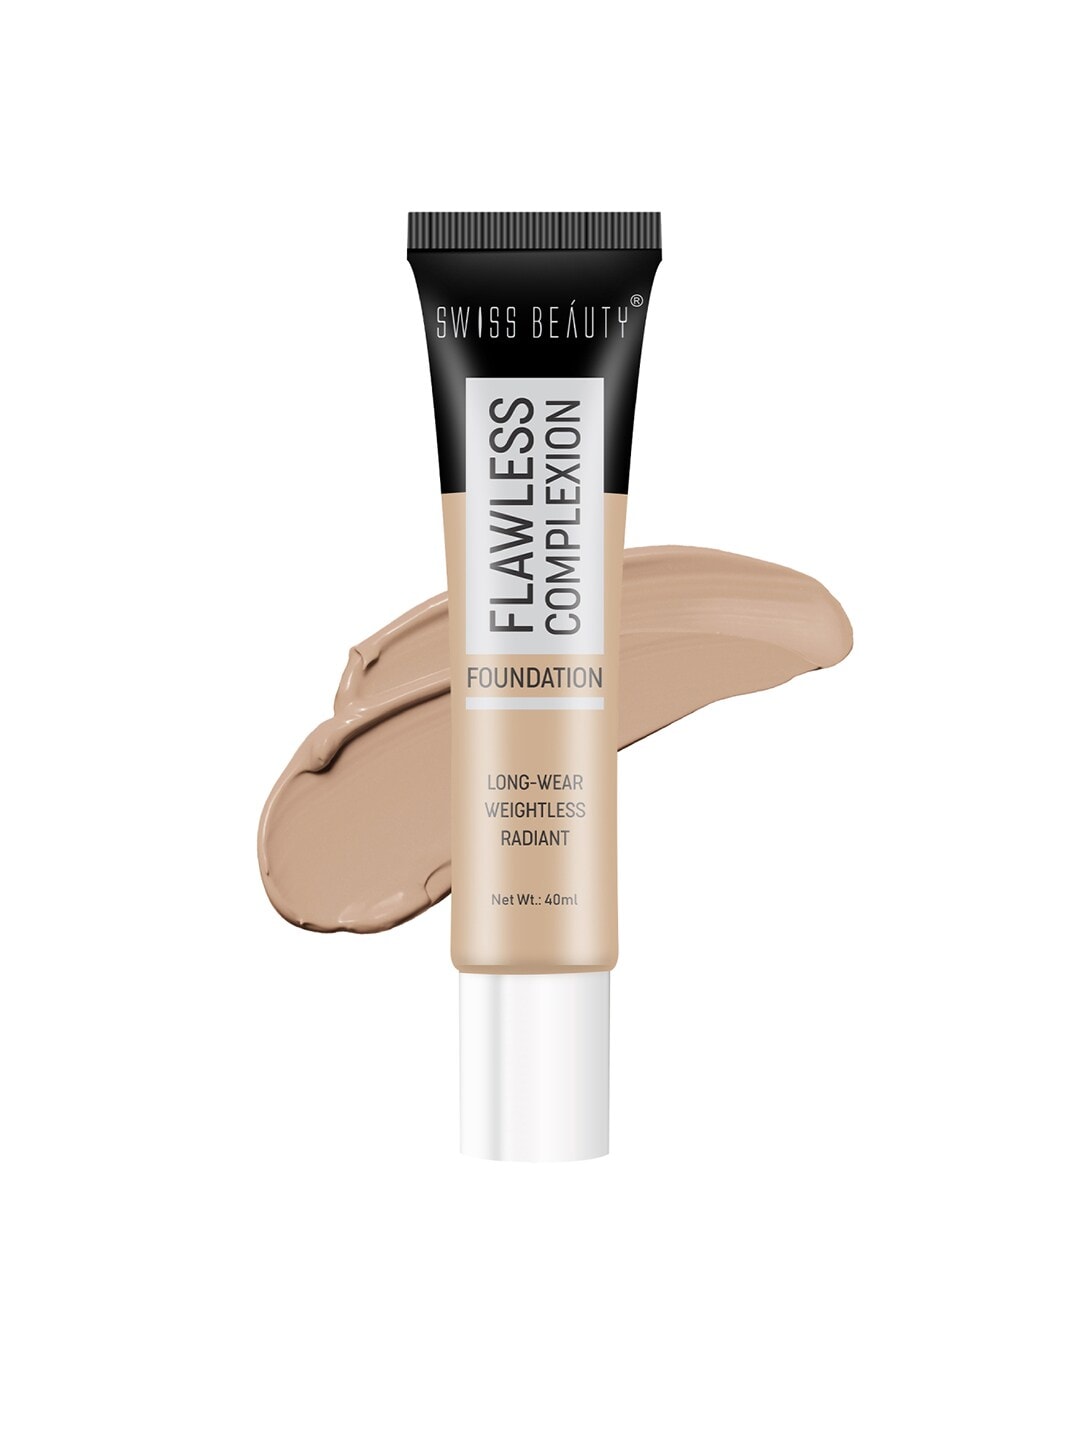 SWISS BEAUTY Flawless Complexion Long-Wear Weightless & Radiant Foundation - Natural Beige Price in India